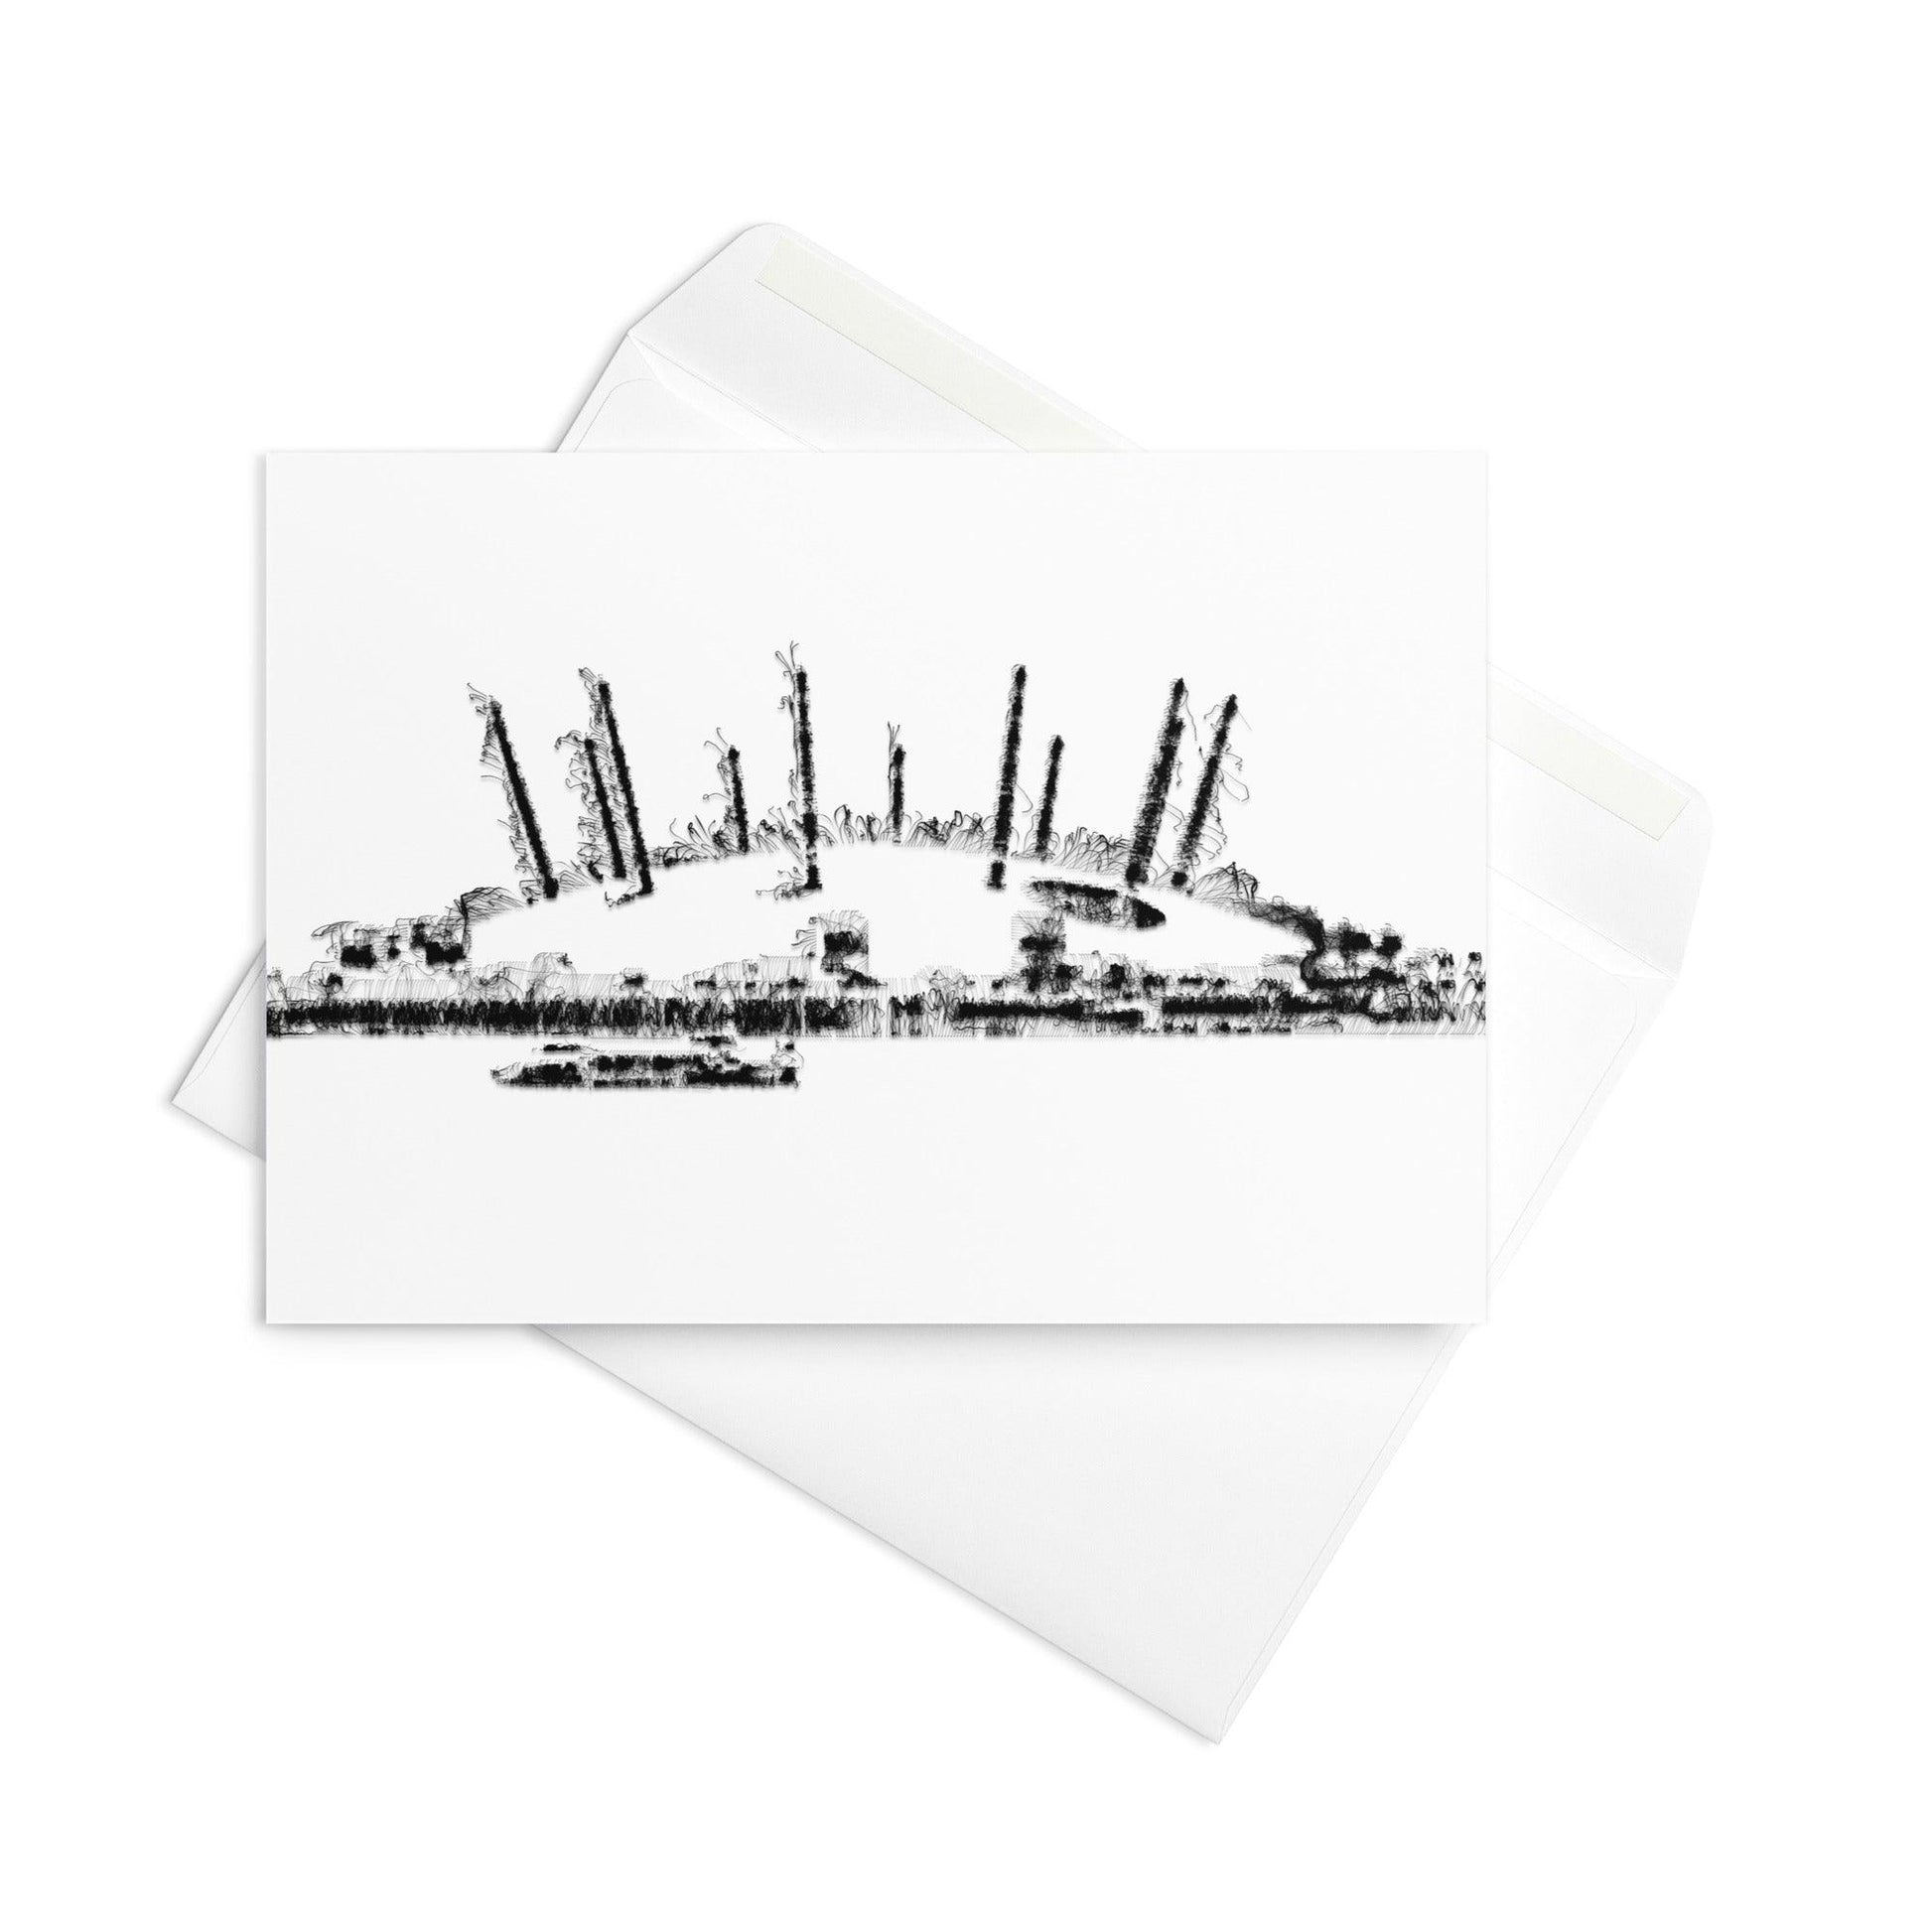 London O2 Arena - Note Card - iSAW Company